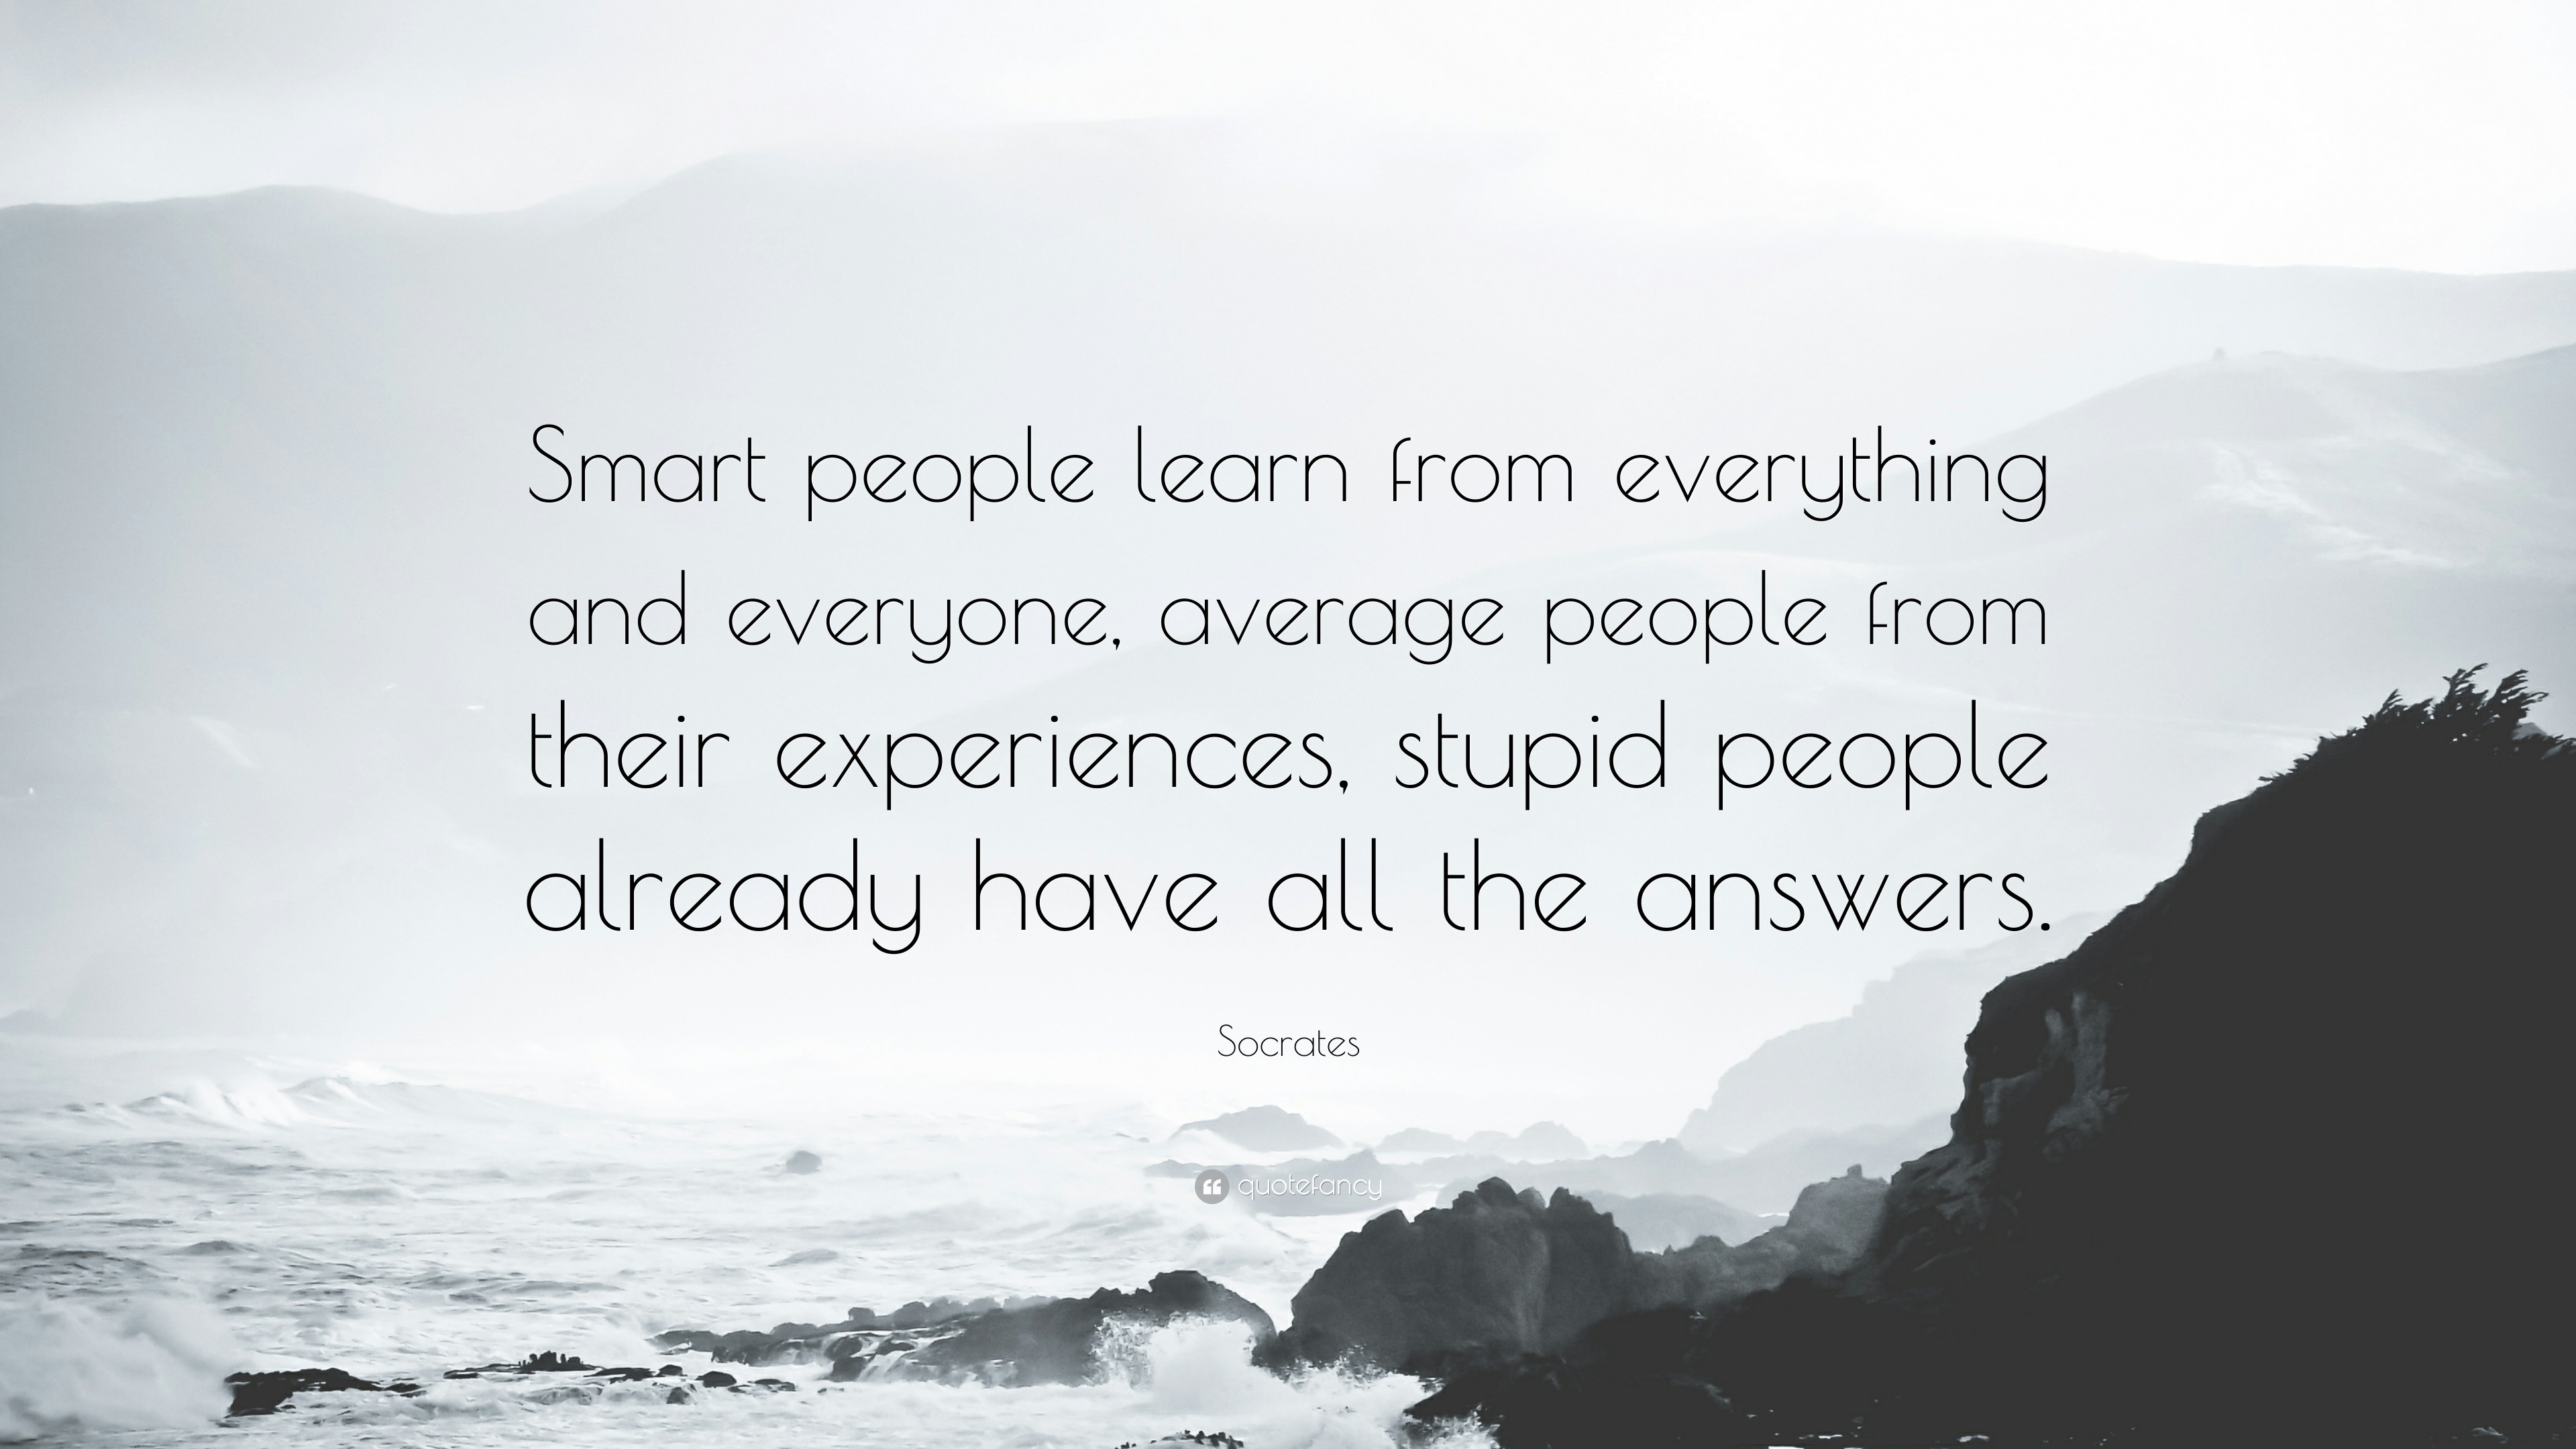 Socrates Quote “Smart people learn from everything and